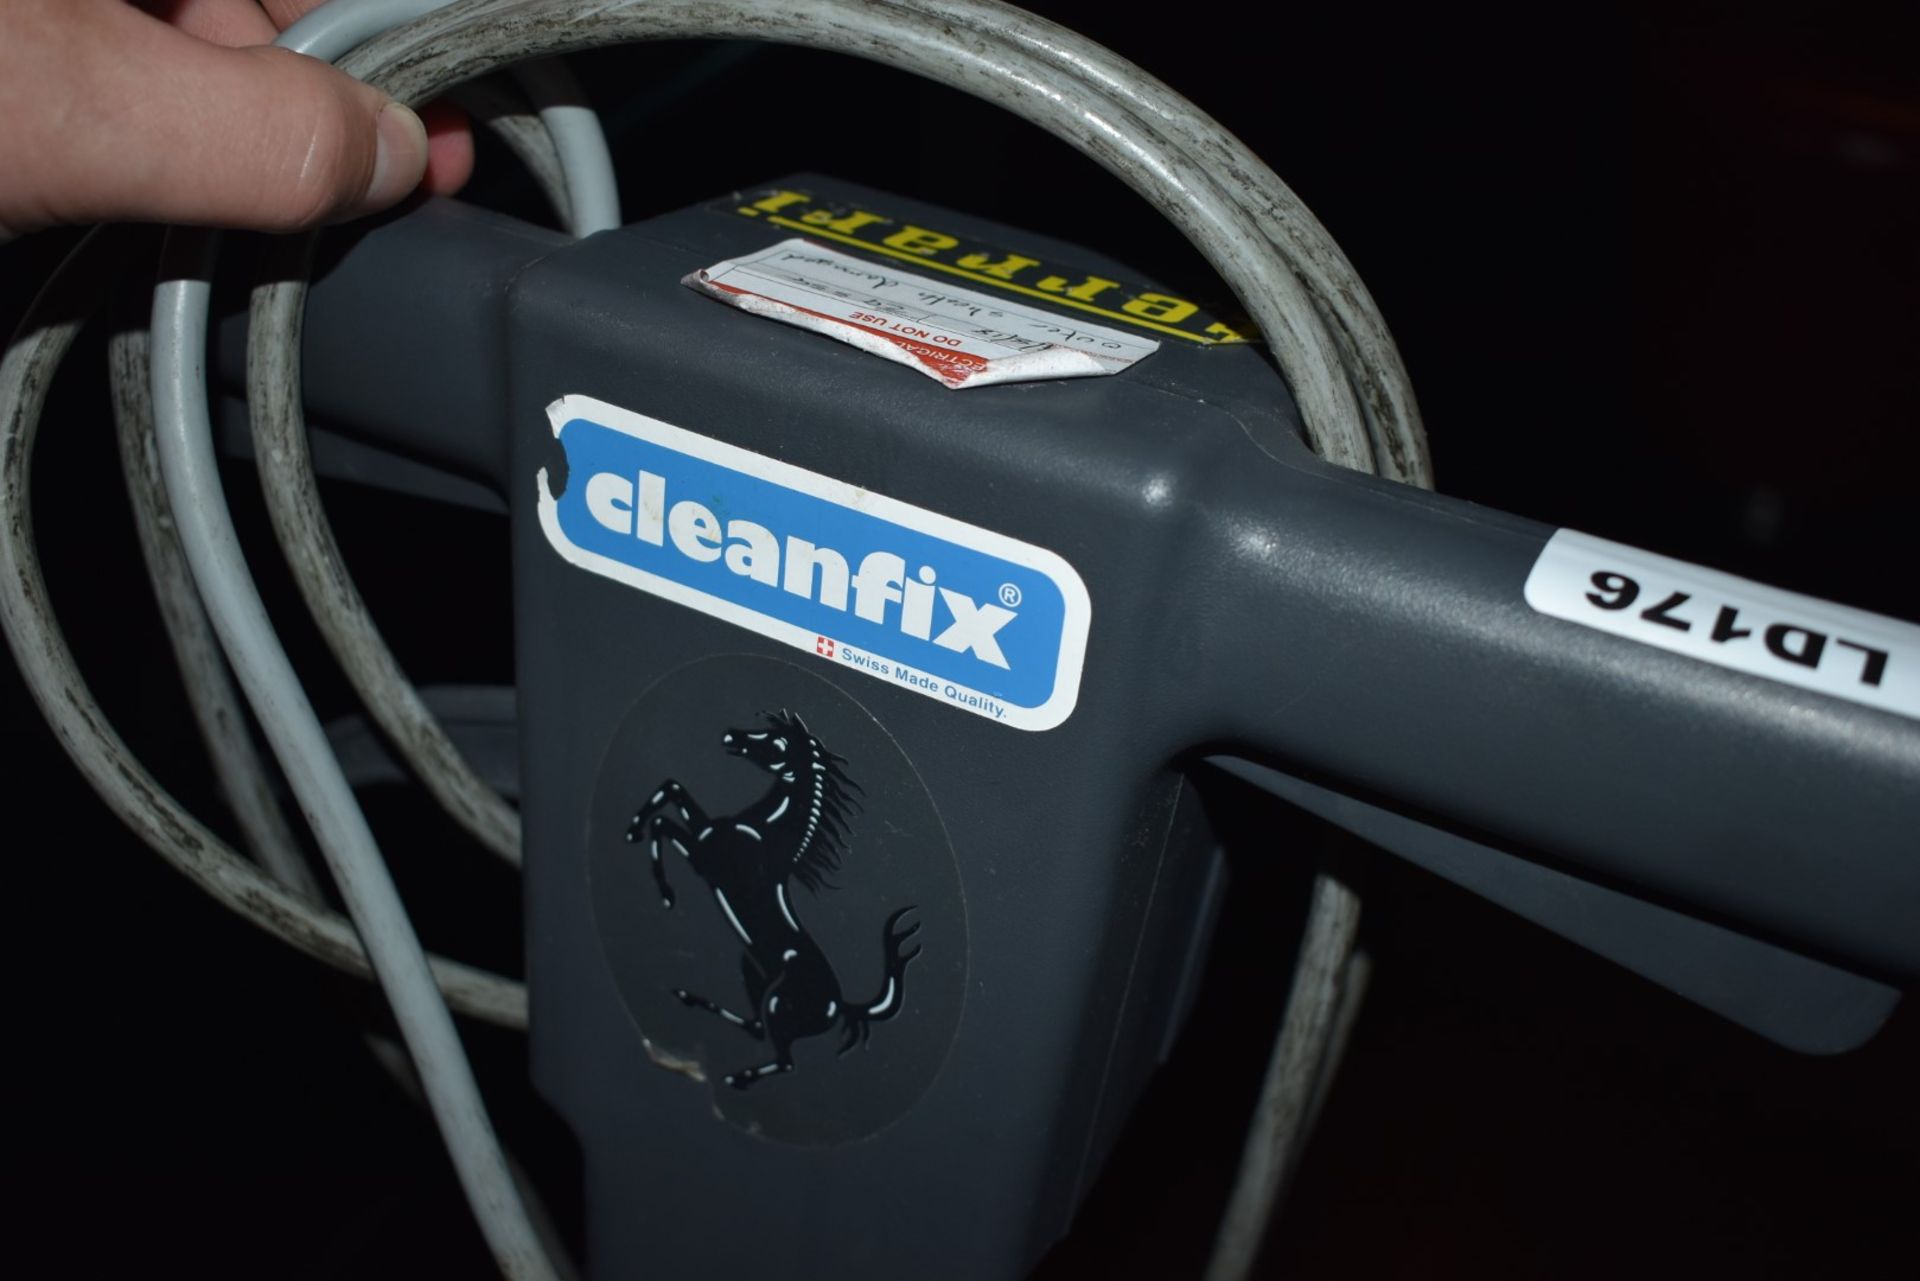 1 x Cleanfix 'POWER DISC 165' Commercial Floor Cleaner - Swiss Made - CL392 - Ref LD176 1F - - Image 4 of 6